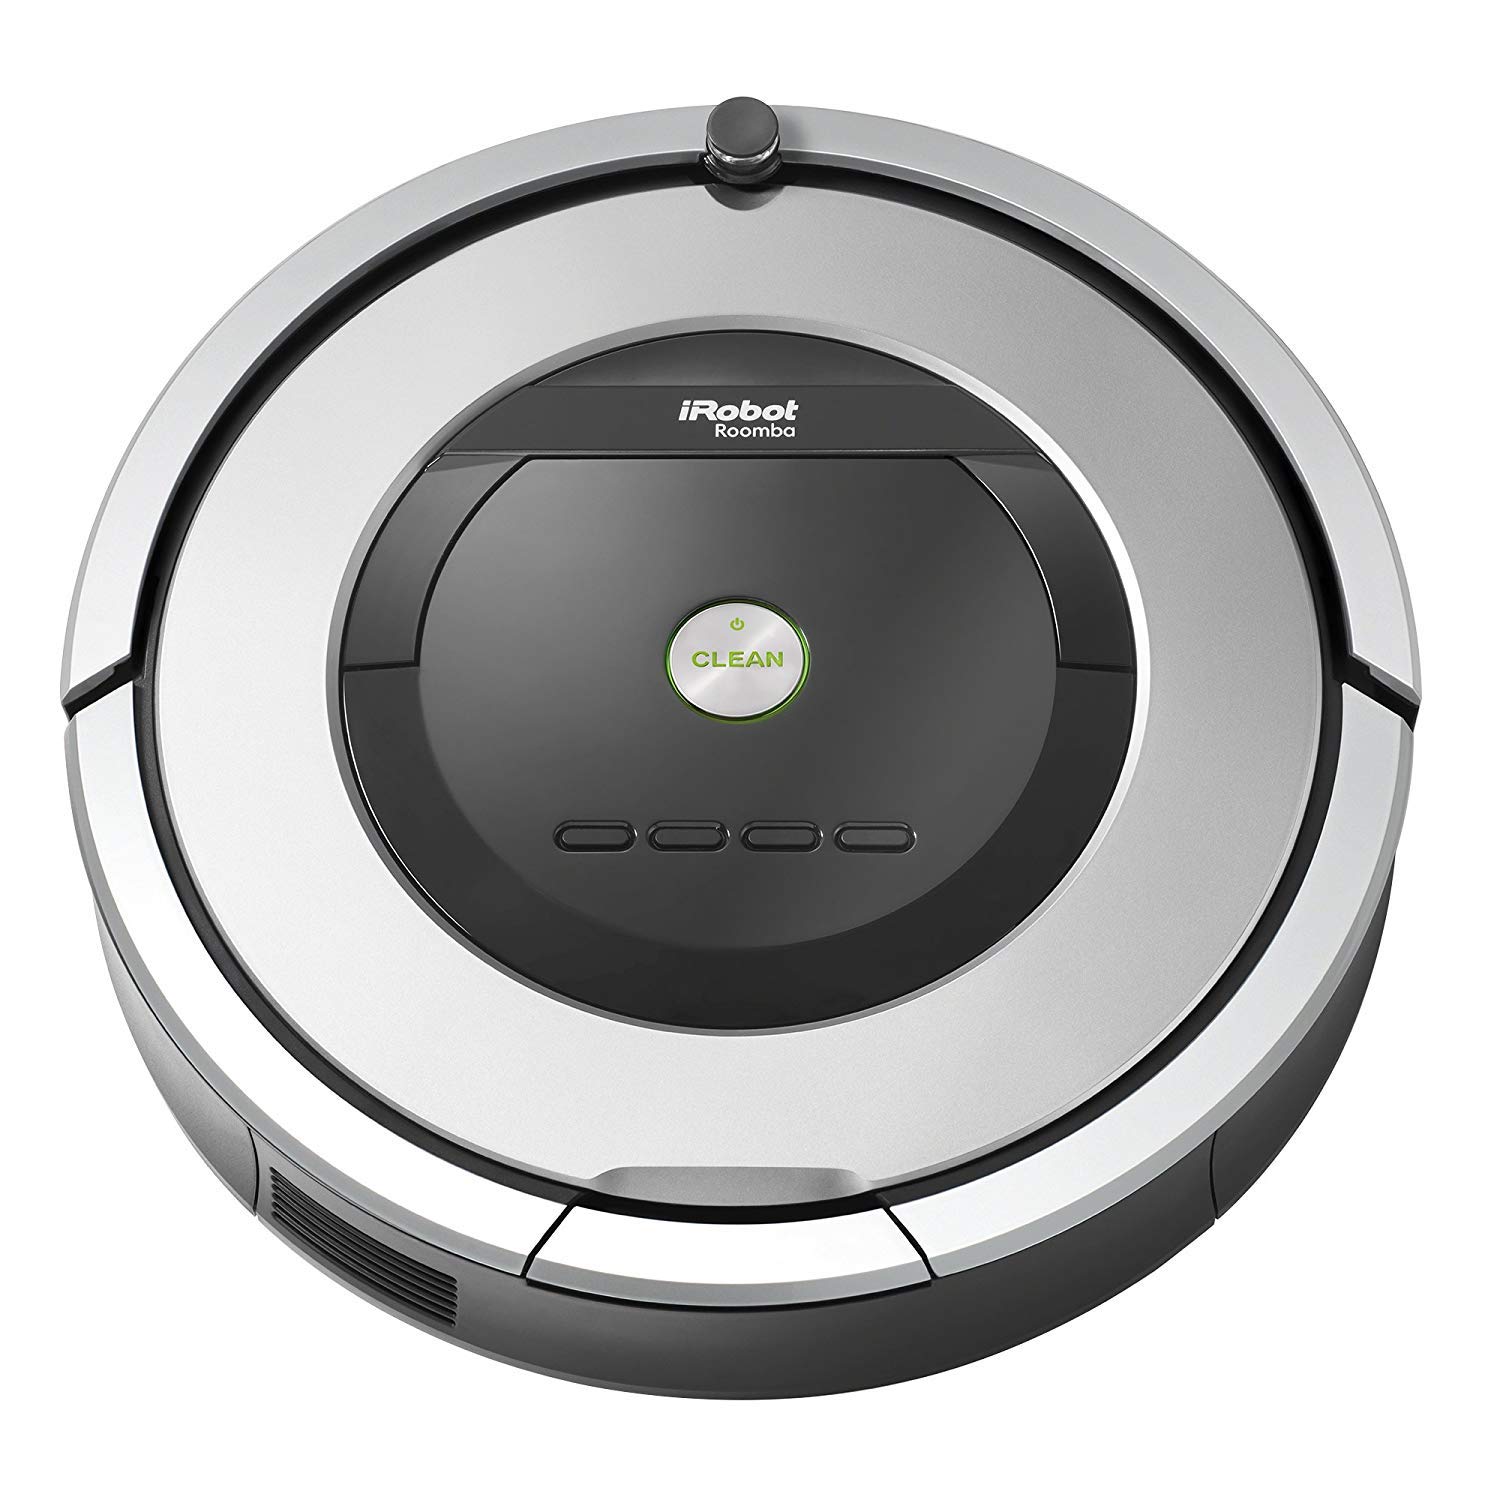 40% Off iRobot Roomba 860 Robotic Vacuum with Virtual Wall Barrier and Scheduling Feature (Renewed)